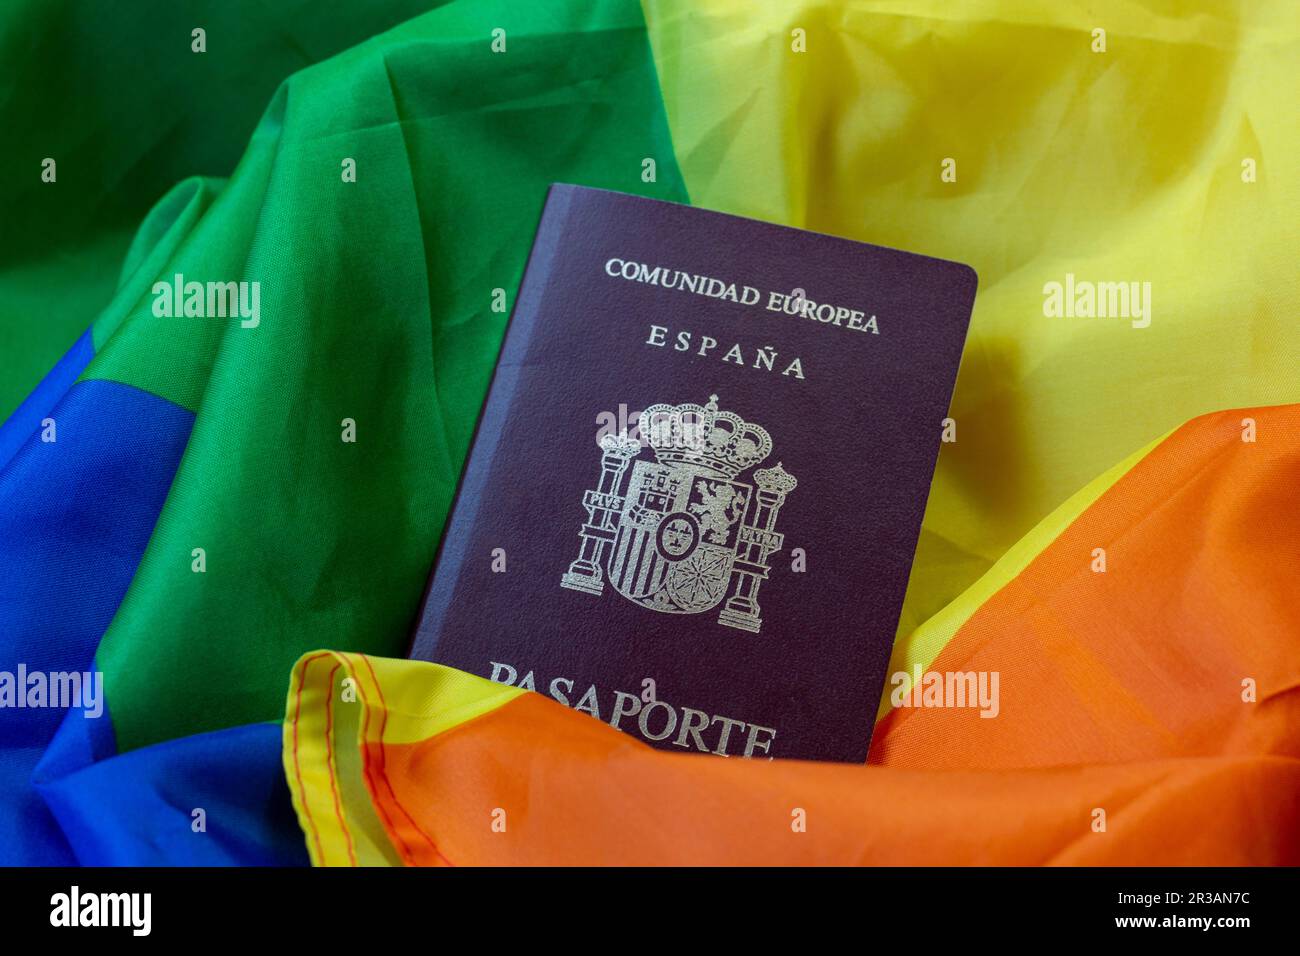 Passport of the European community, of Spain. With a background of a map, pride flag, inside a car or with sunglasses, or a hat Stock Photo